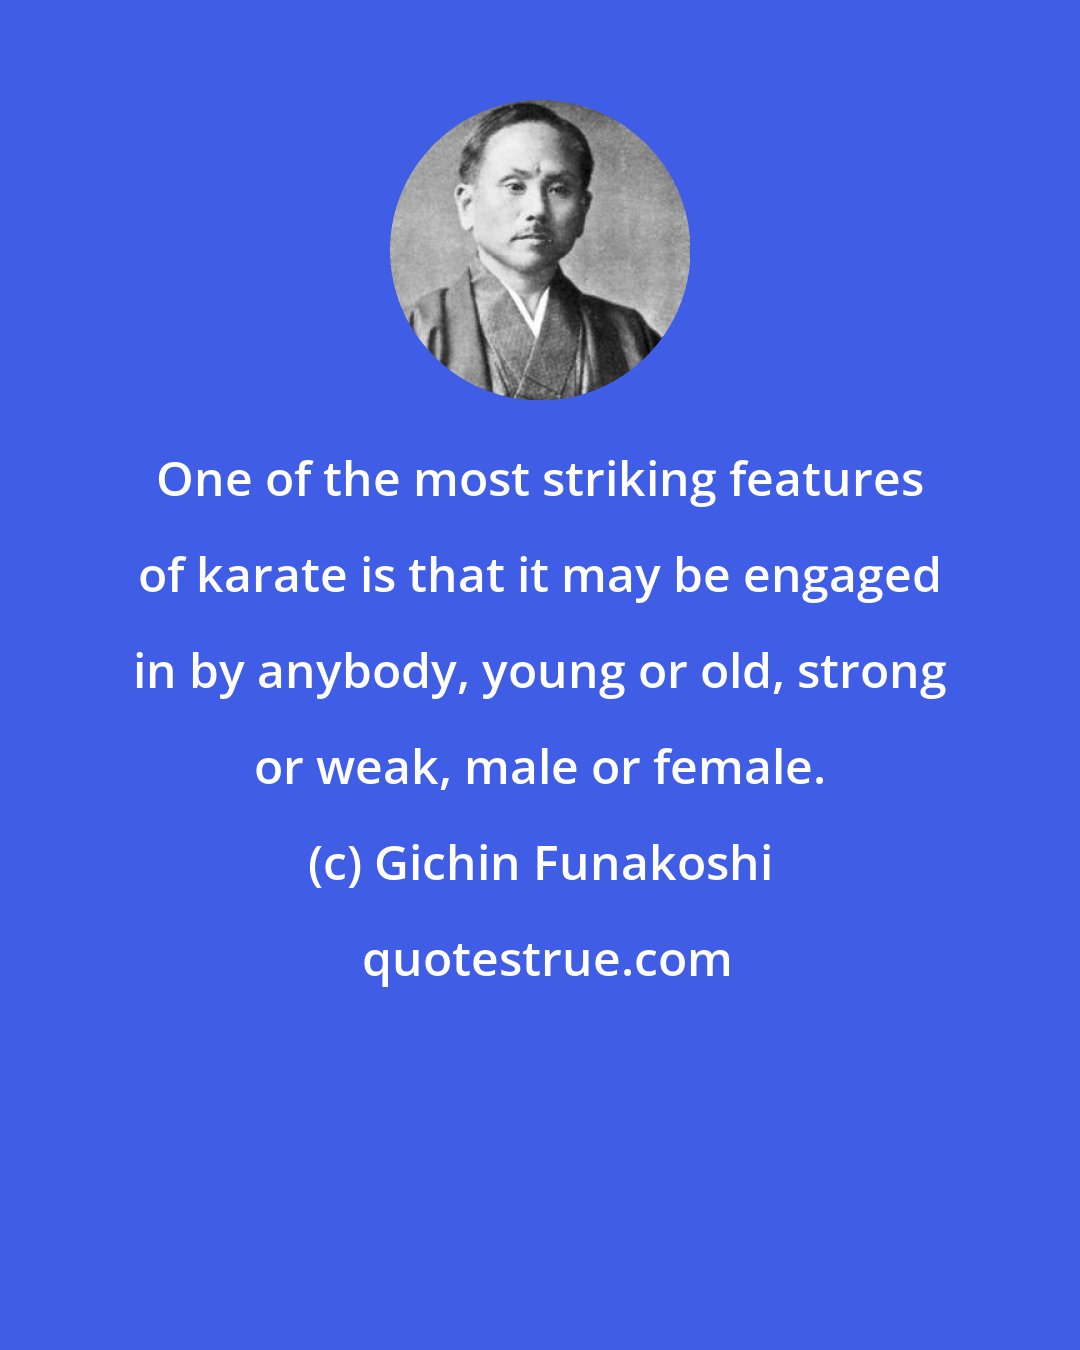 Gichin Funakoshi: One of the most striking features of karate is that it may be engaged in by anybody, young or old, strong or weak, male or female.